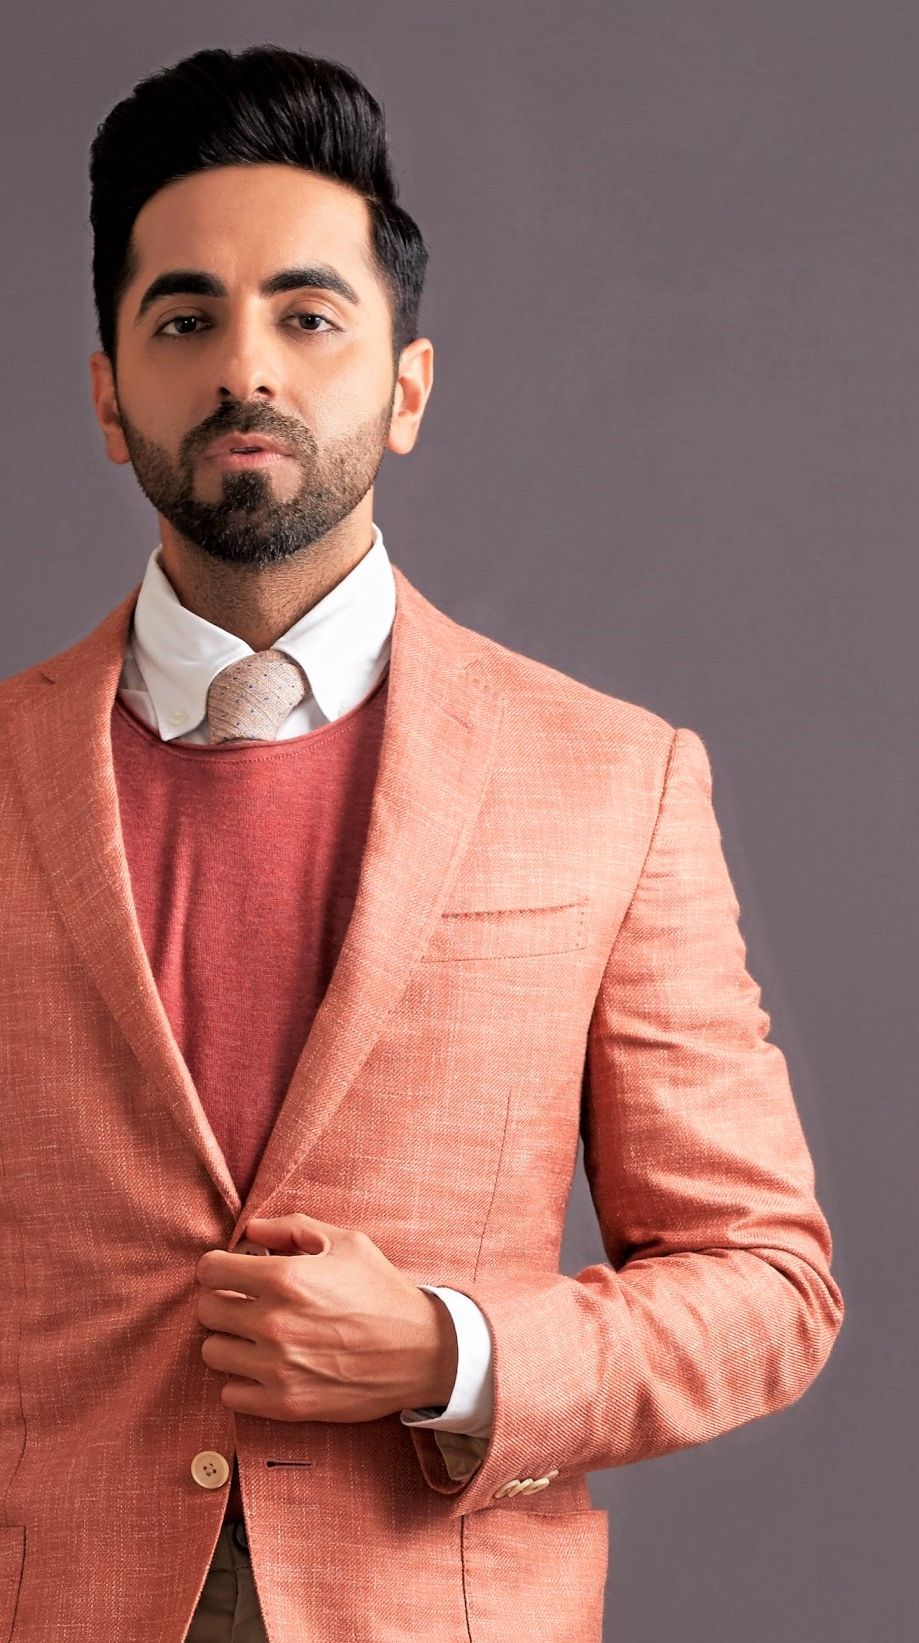 Bollywood actor AyushmannKhurrana says people can expect some really beautiful singles coming from him in the near future